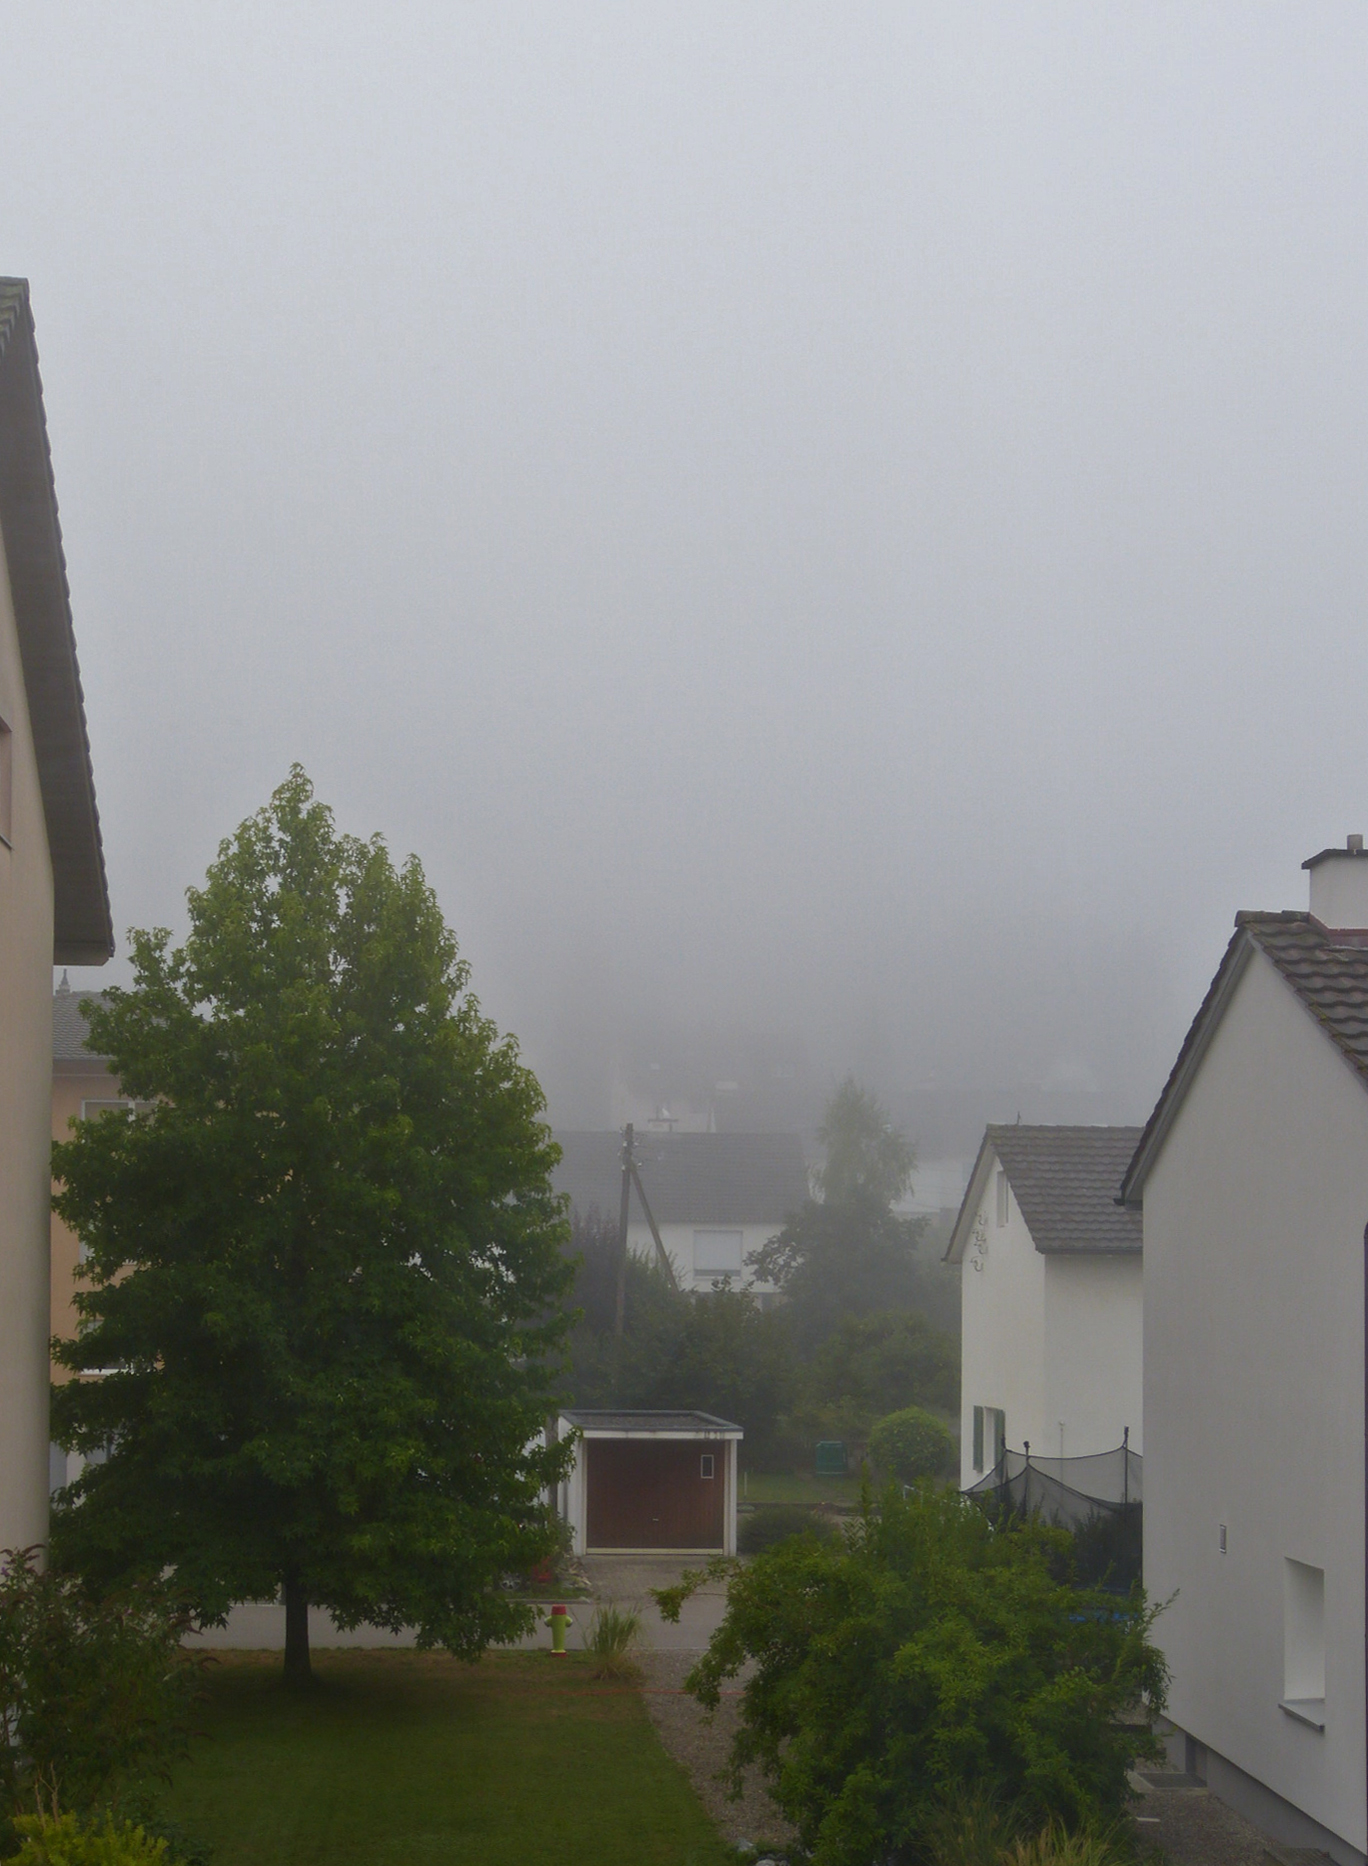 The fog in the village...